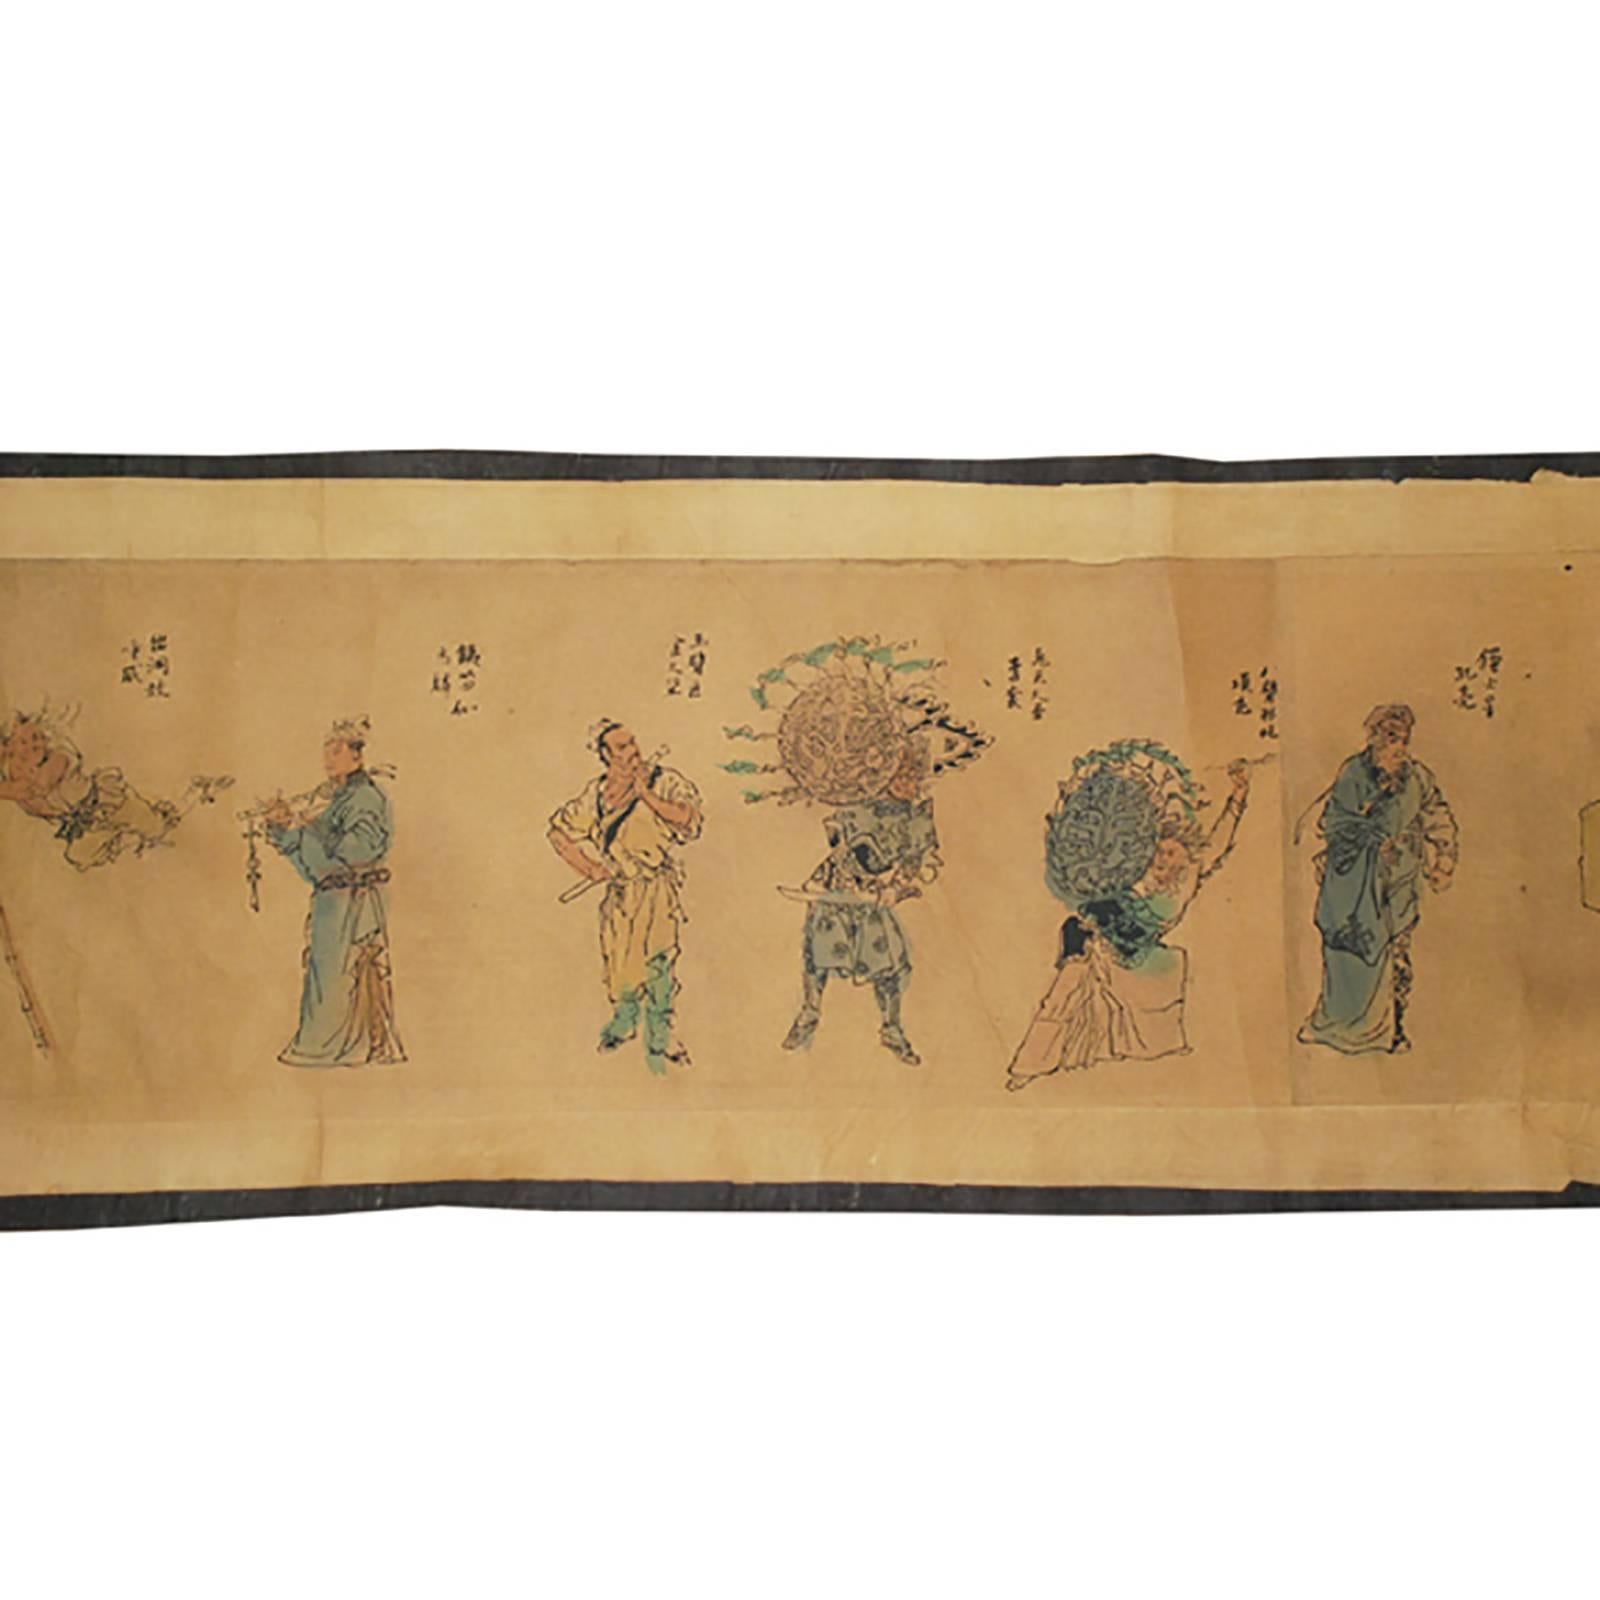 This early 20th century printed and hand-colored hand scroll portrays one third of the 108 heroes from Water Margin, sometimes also know as Outlaws of the Marsh by Shi Nai'an, one of China's four great classical novels. The story takes place during